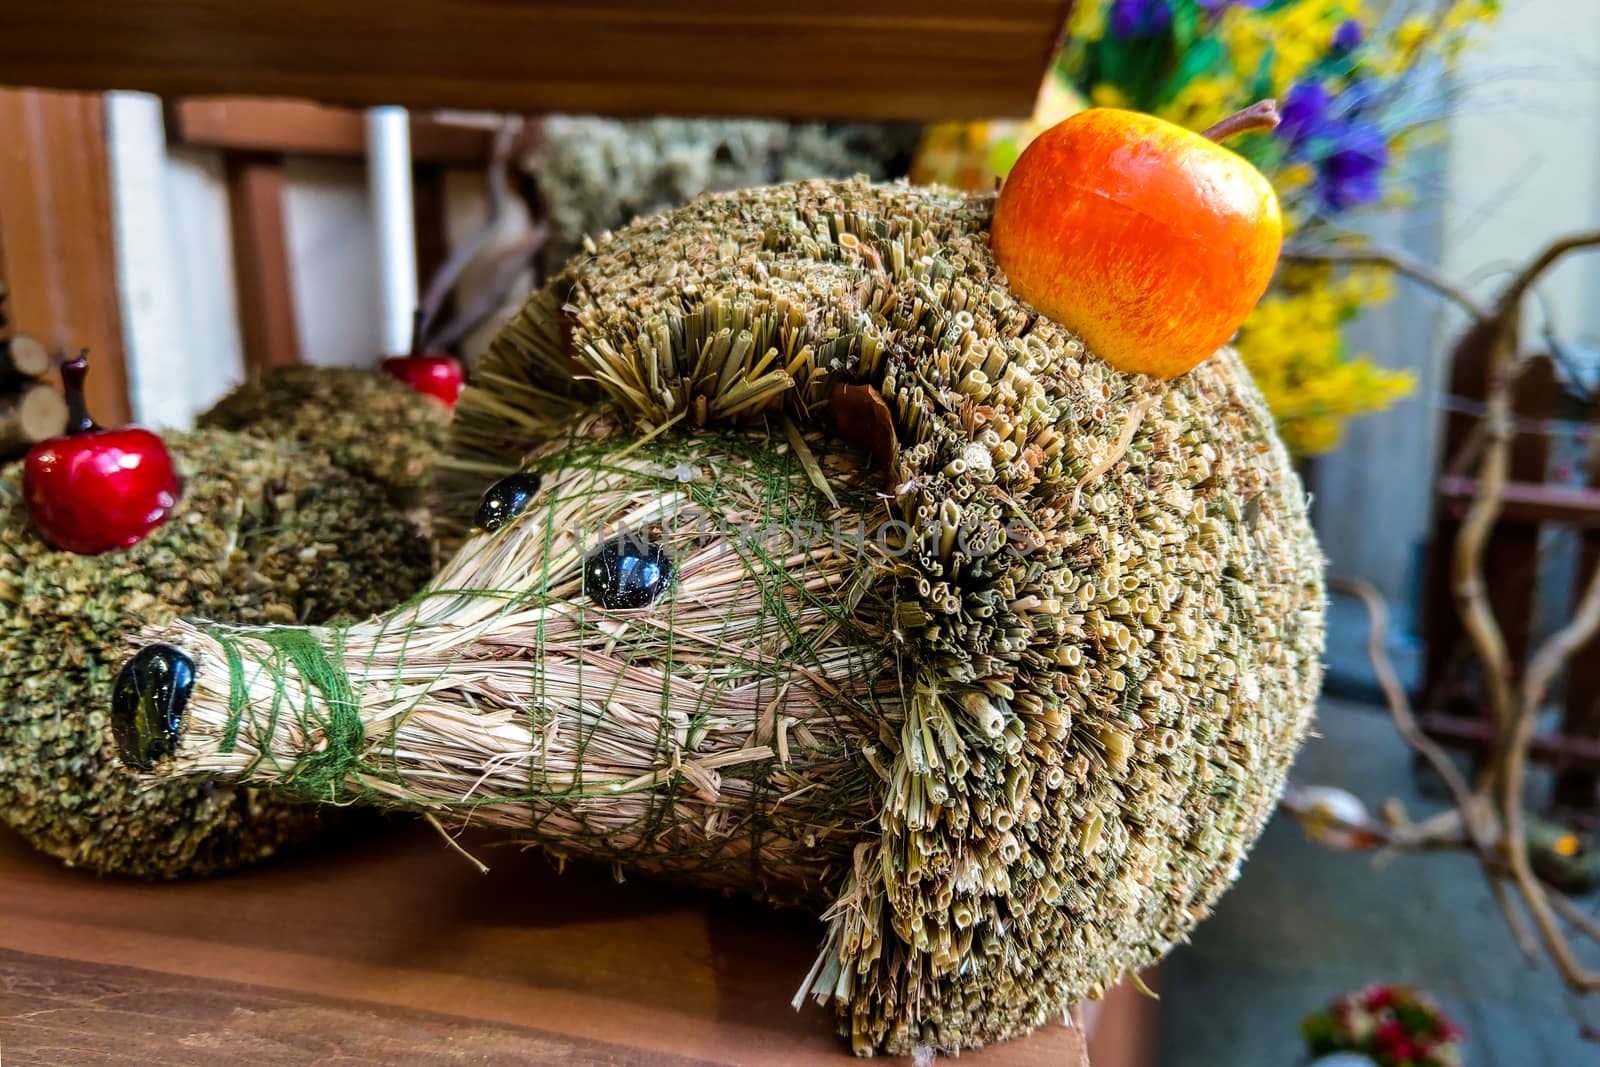 Beautiful decorative hedgehog made of straw with an apple. by kip02kas